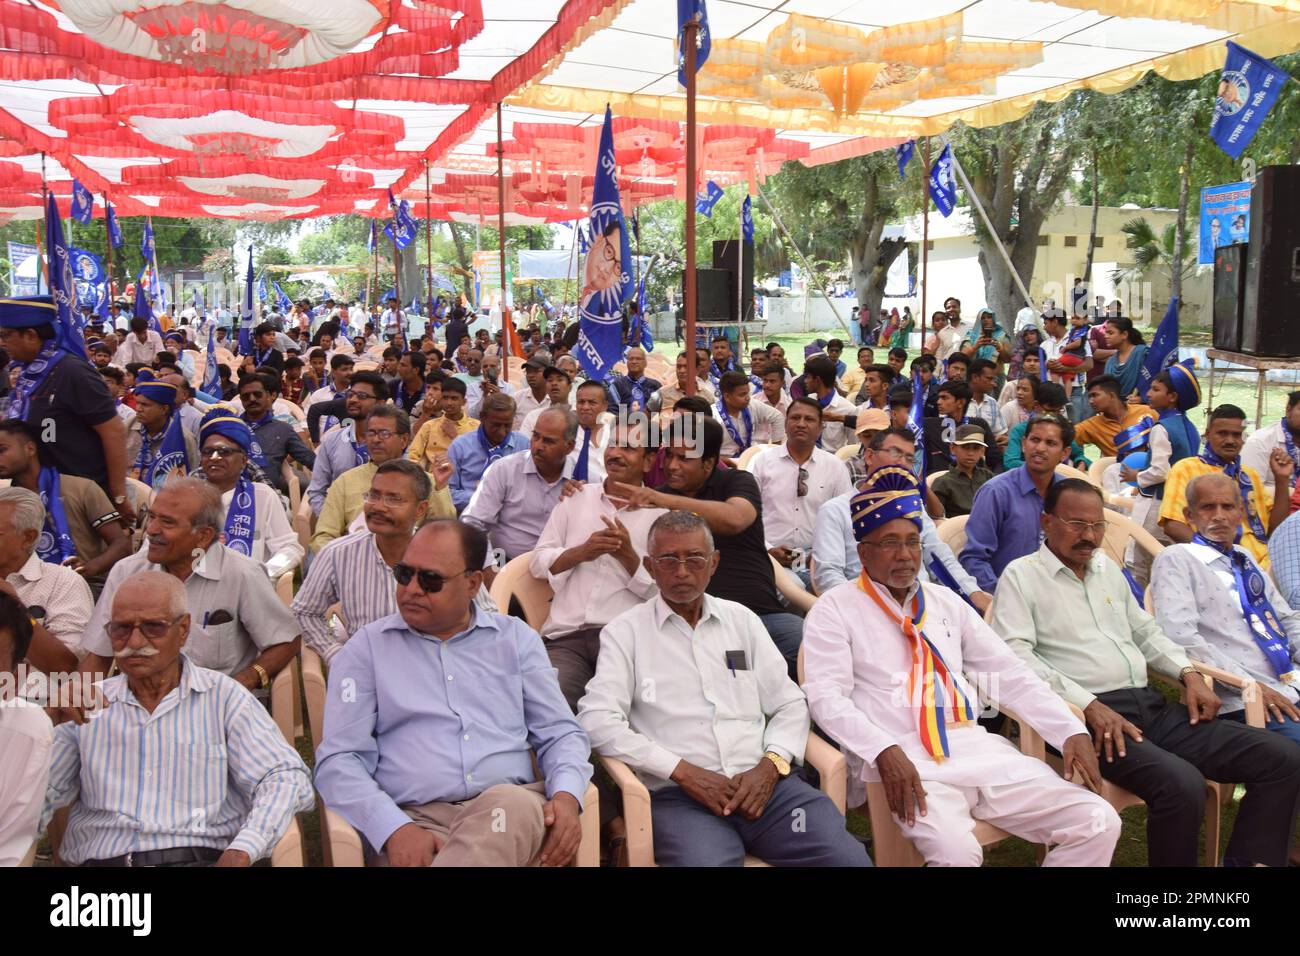 Beawar, Rajasthan, India, April 14, 2023: Members of Dalit community take part in a event on the occasion of birth anniversary of Babasaheb Bhimrao Ambedkar in Beawar. Ambedkar Jayanti is celebrated on April 14 to mark the birth anniversary of Dr. Bhimrao Ambedkar, who is also remembered as the 'Father of the Indian Constitution'. Ambedkar was an Indian jurist, economist, politician and social reformer who inspired the Dalit Buddhist Movement. Credit: Sumit Saraswat/Alamy Live News Stock Photo